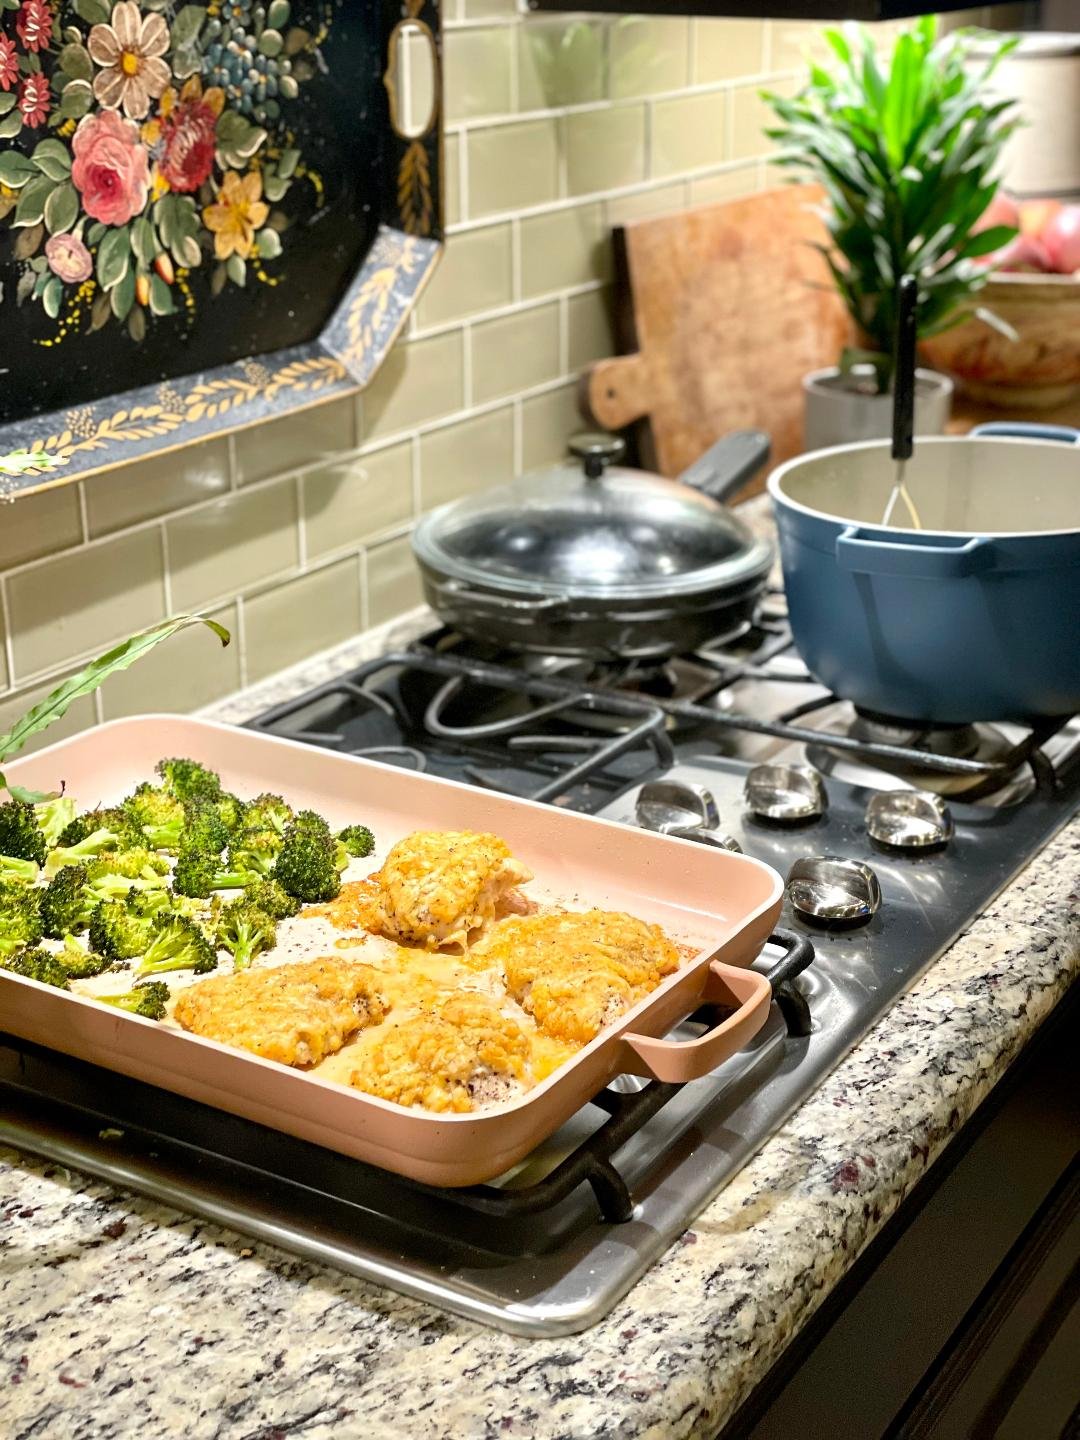 Oake Cast Iron Cleaning Kit, Created for Macy's - ShopStyle Countertop  Storage